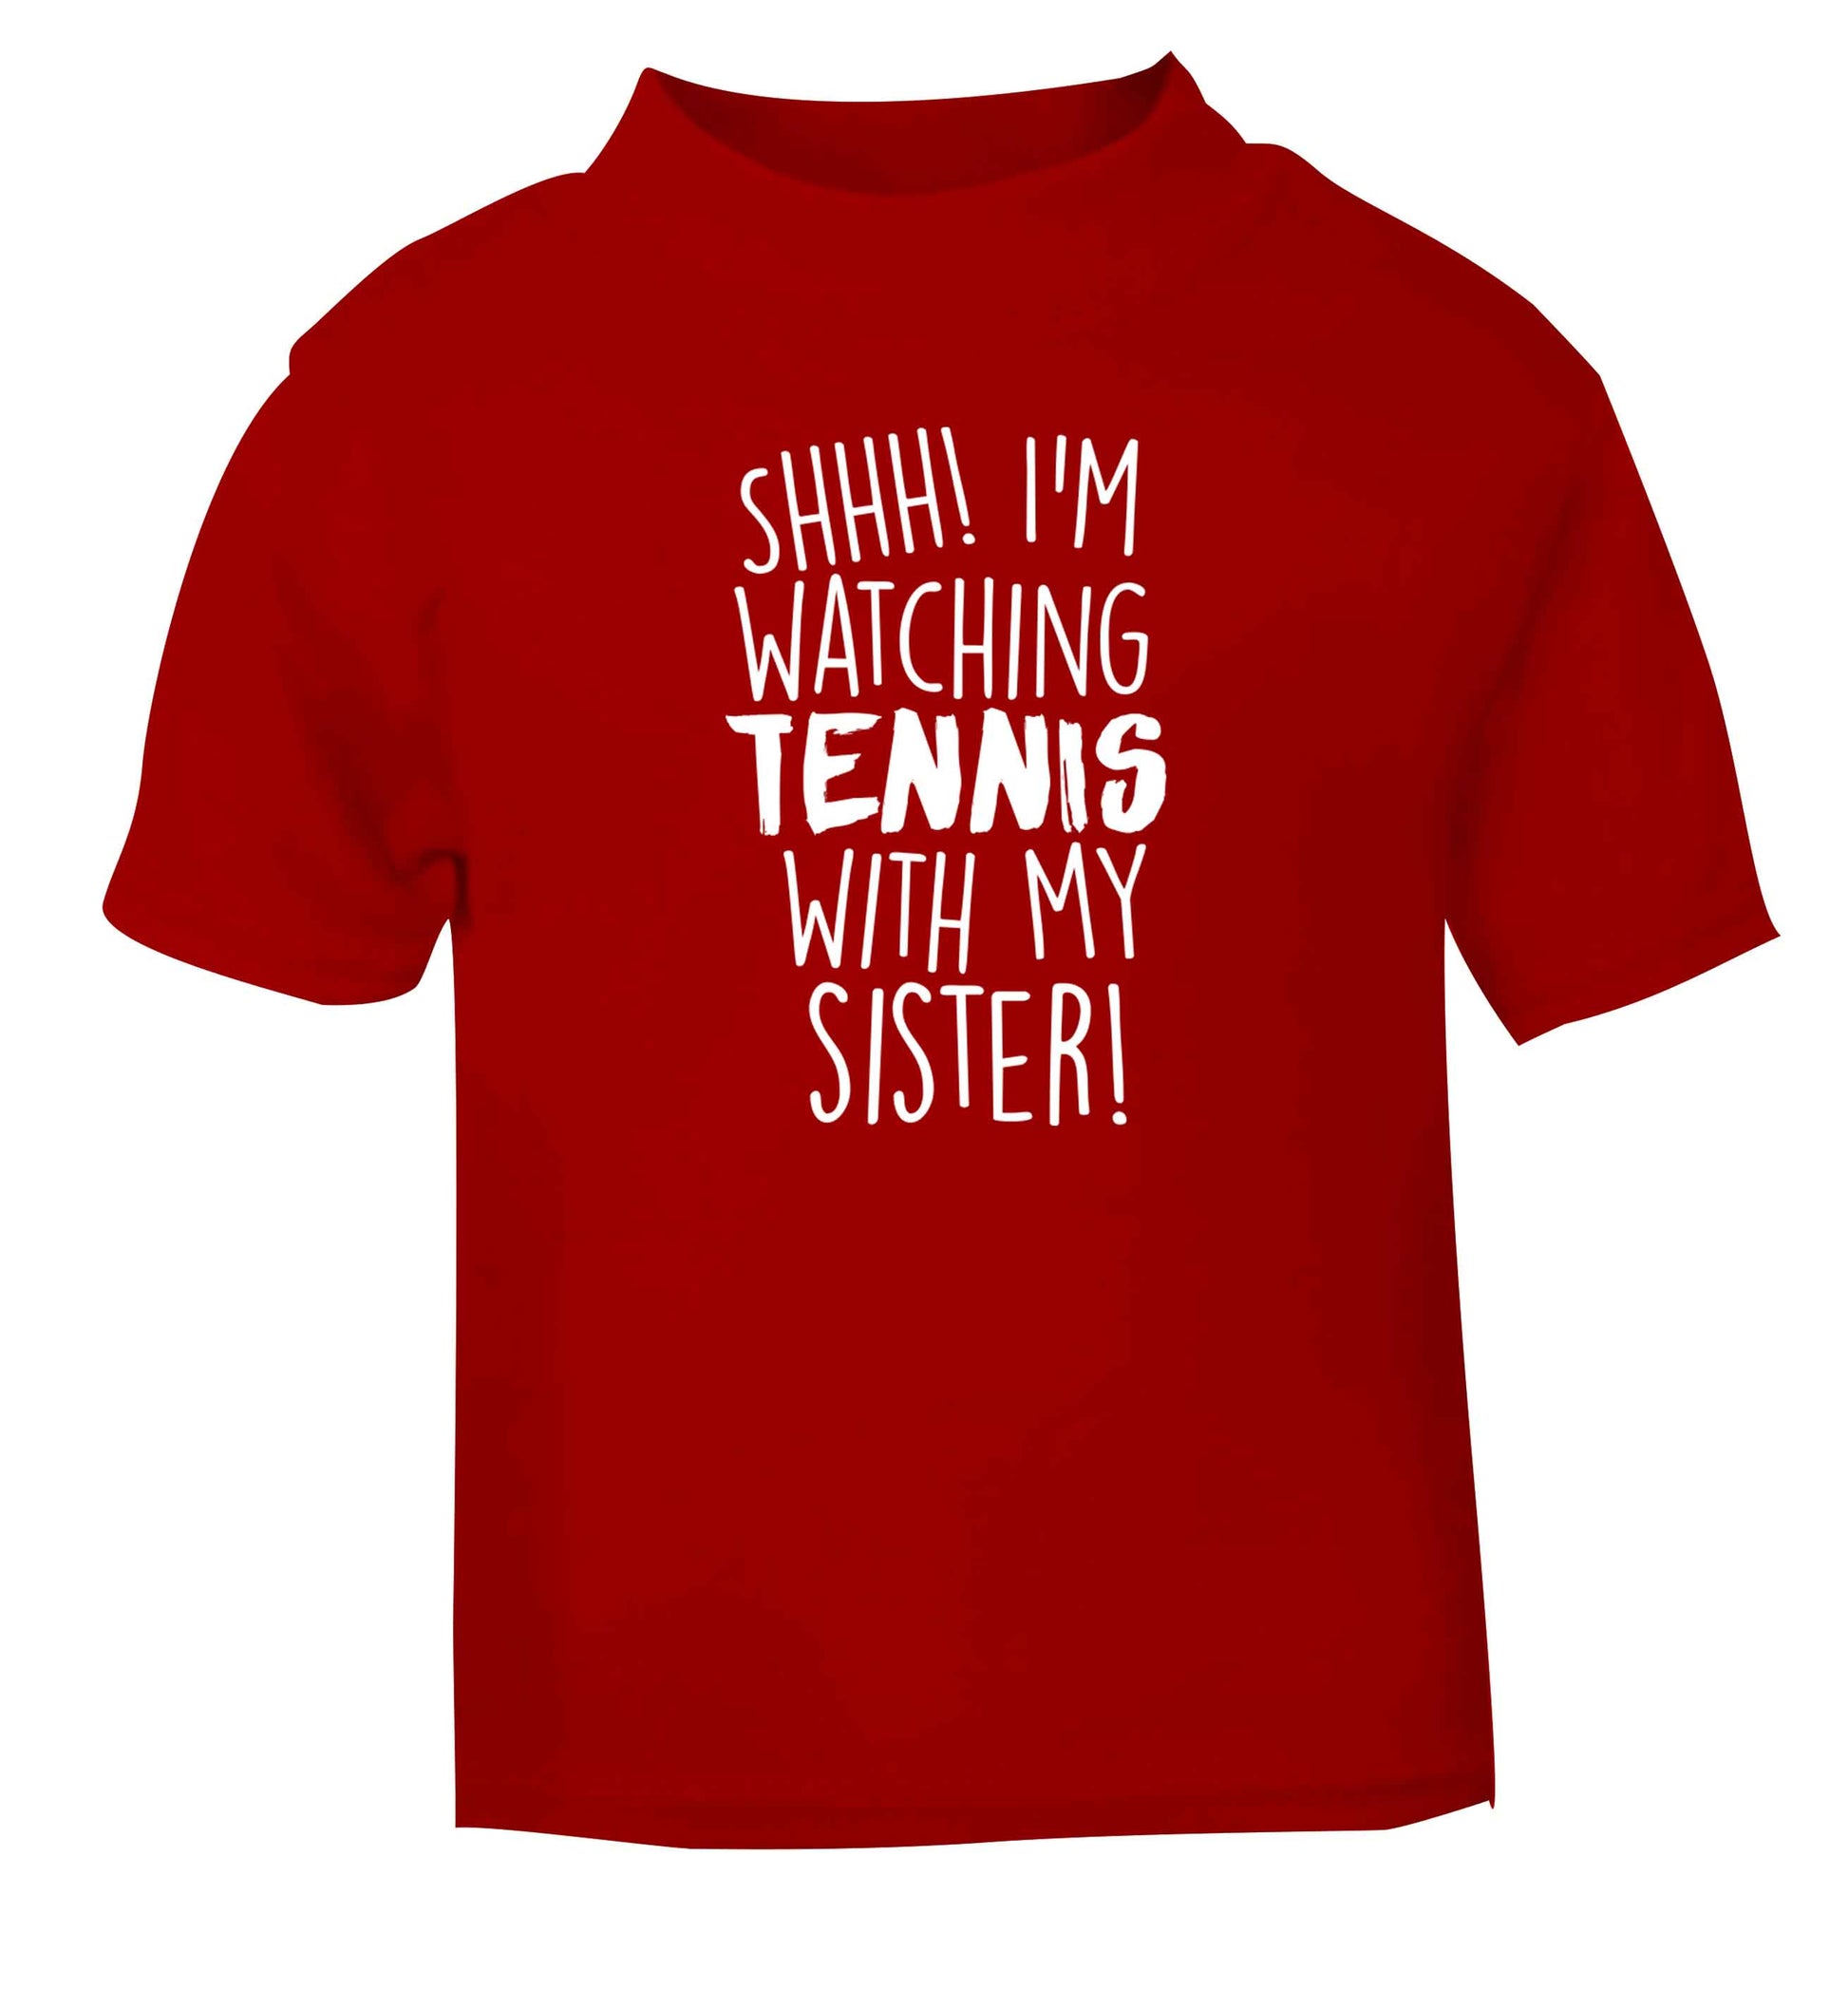 Shh! I'm watching tennis with my sister! red Baby Toddler Tshirt 2 Years